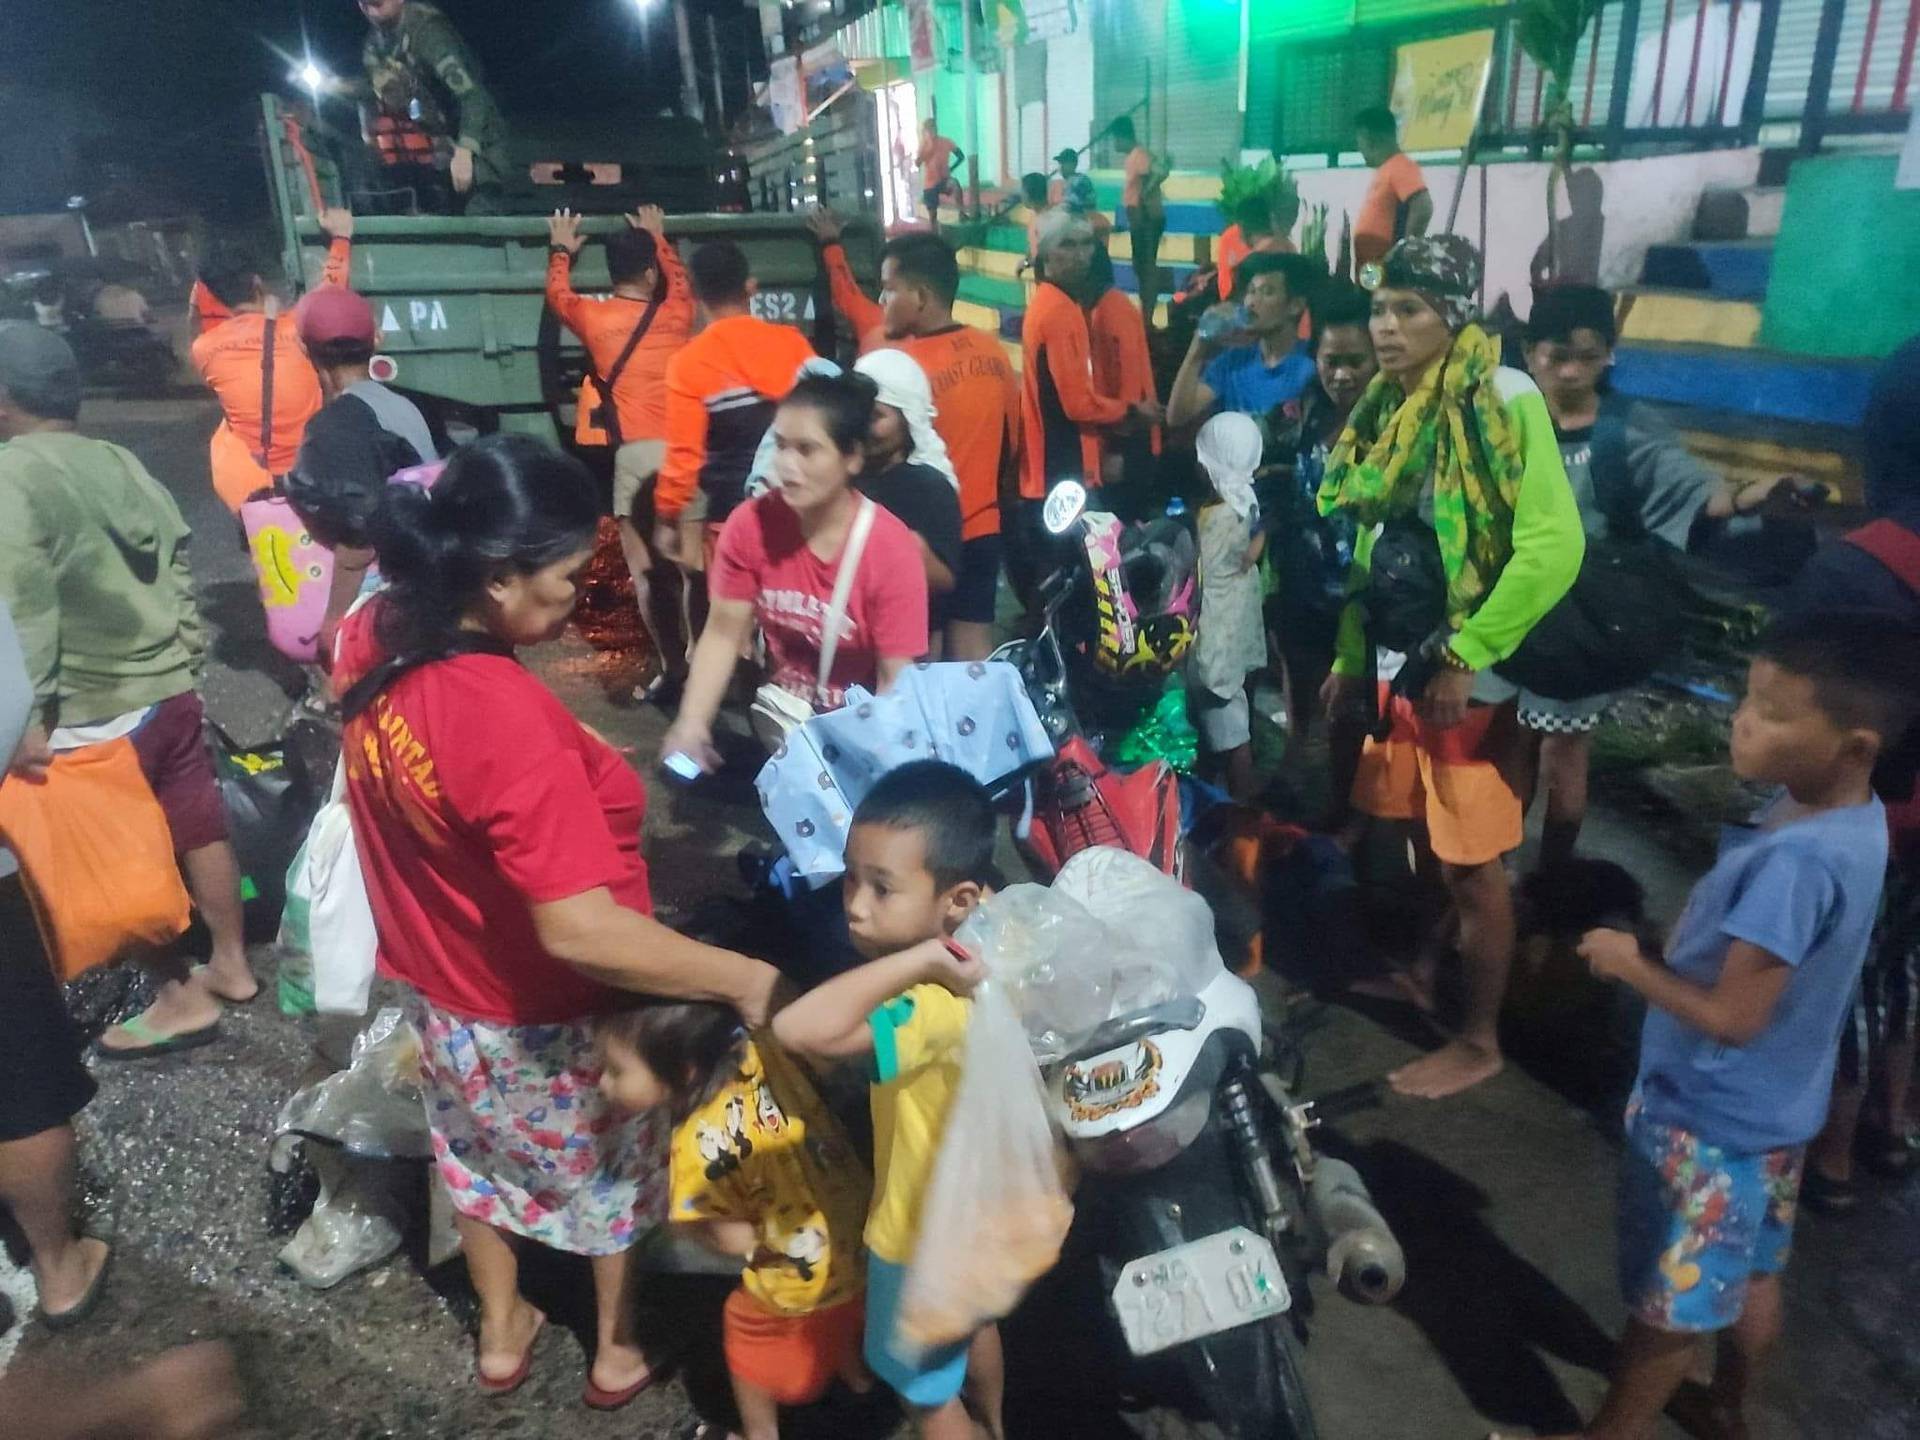 Rescue operation following flood due to Tropical Storm Nalgae in Philippines